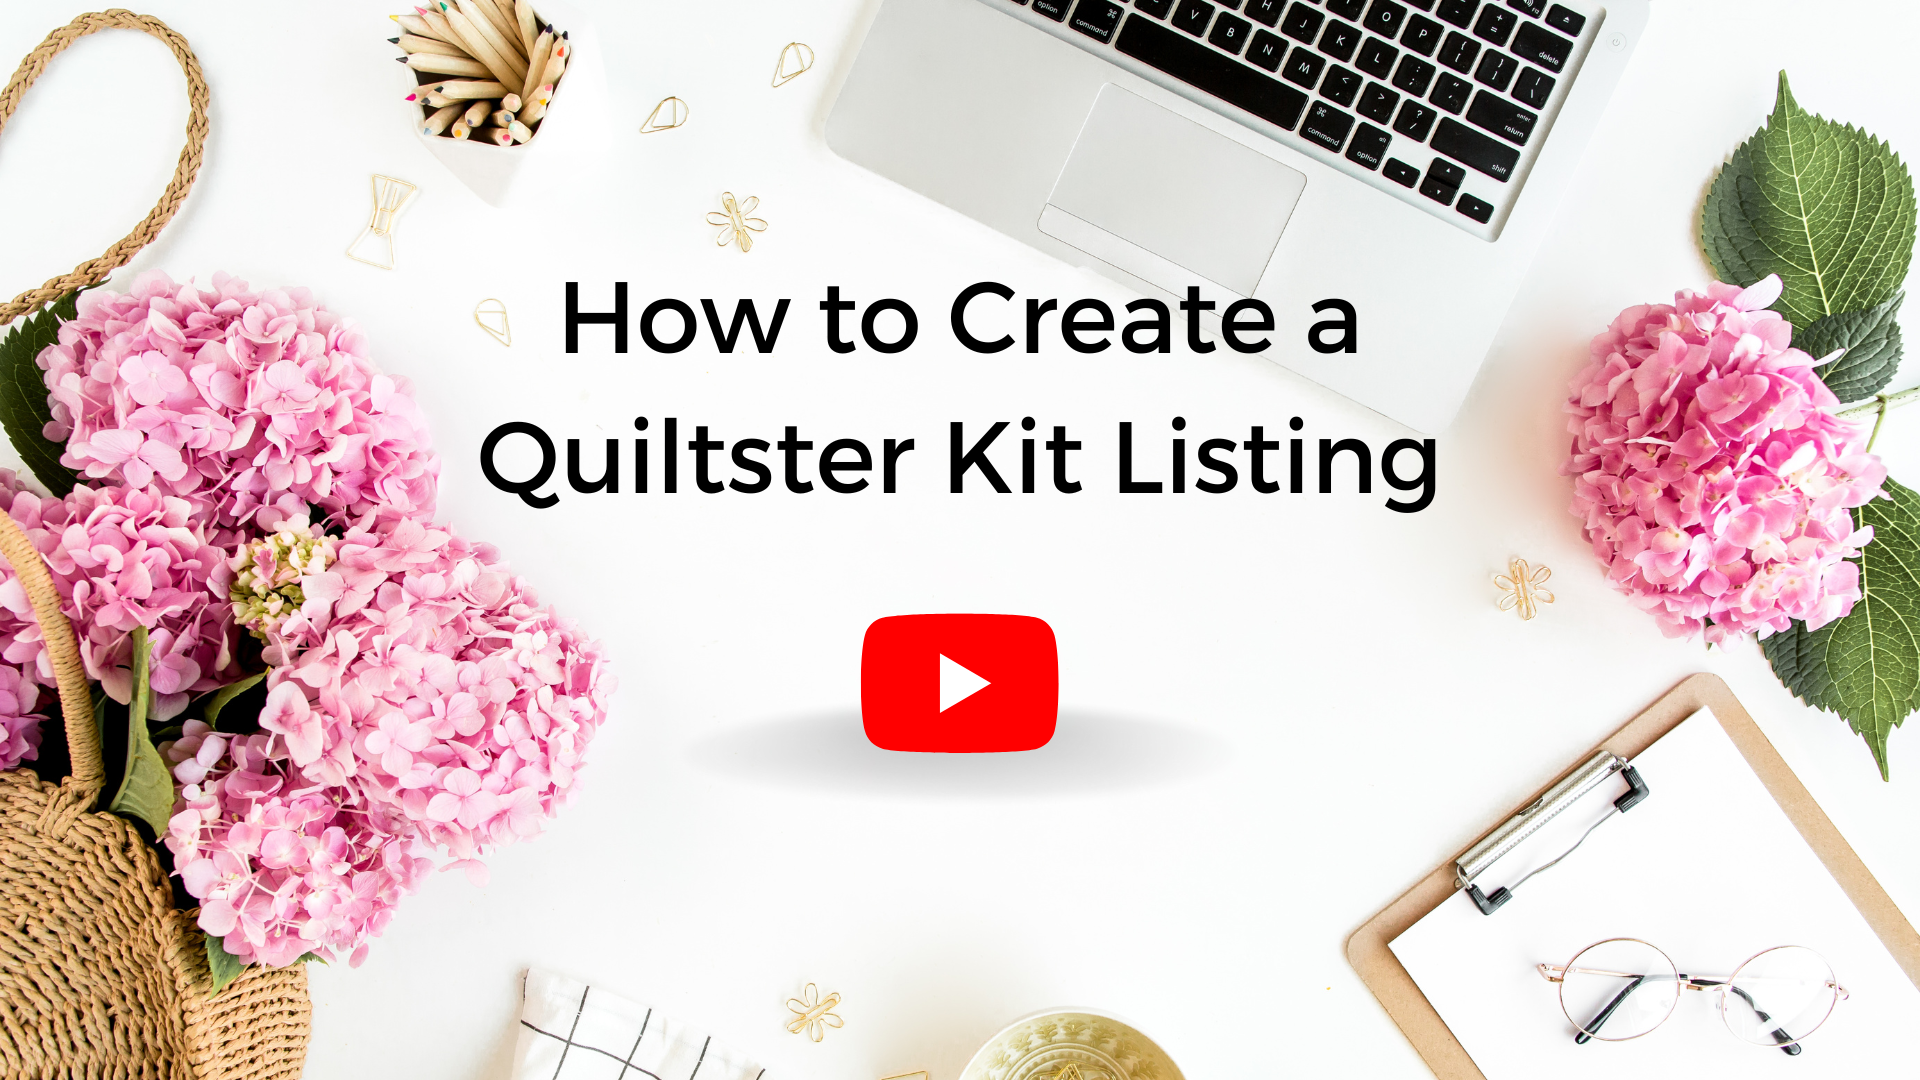 How to Create a Quiltster Kit Listing